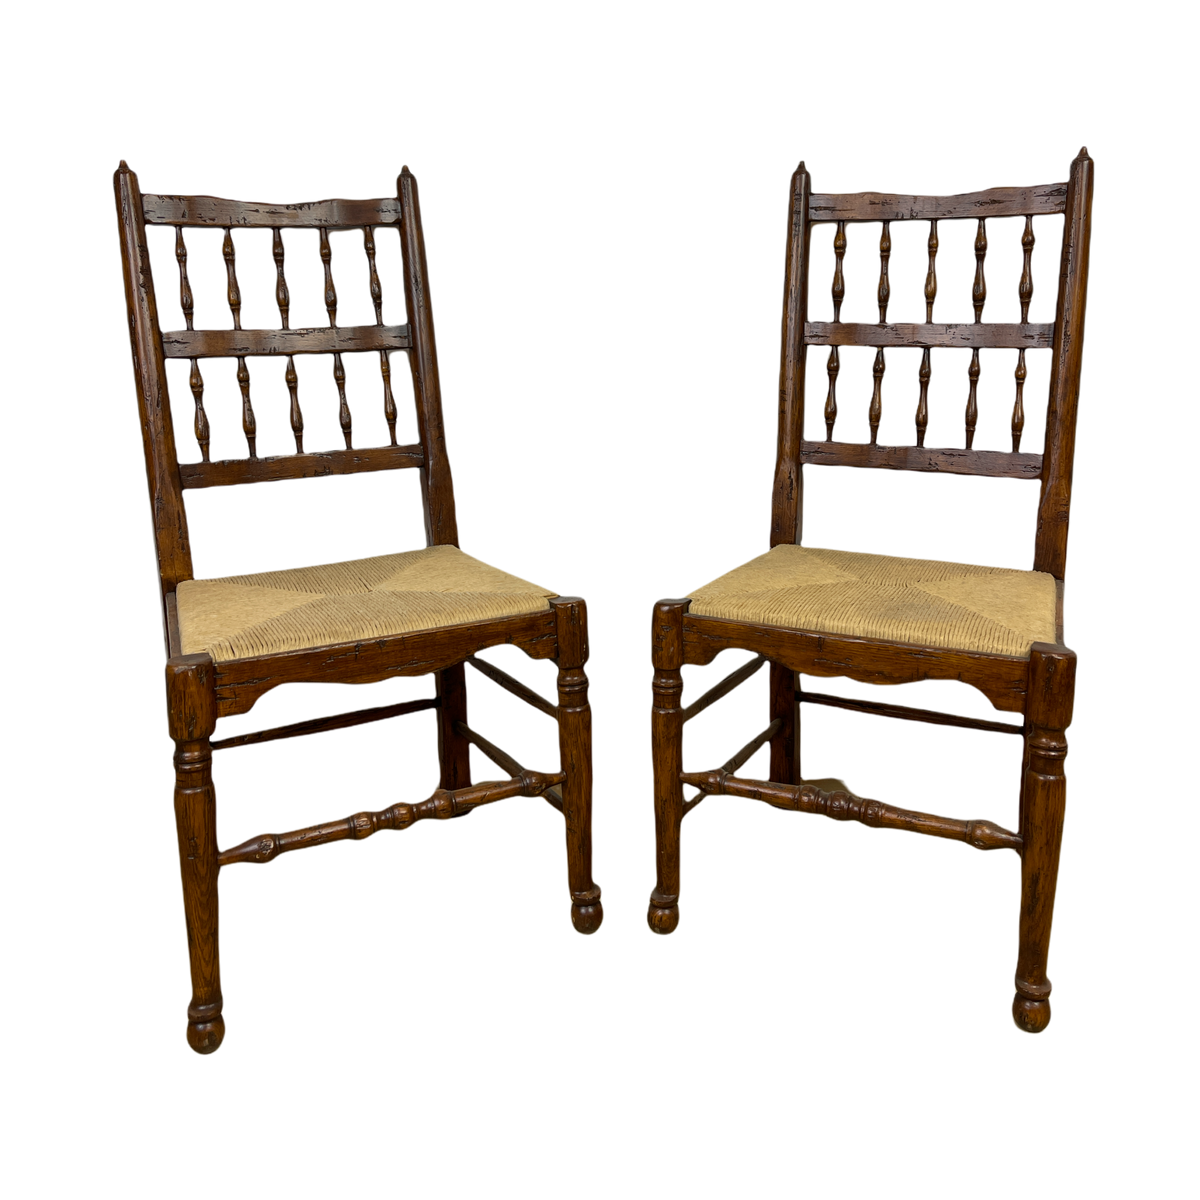 Pair of Spindleback Chairs